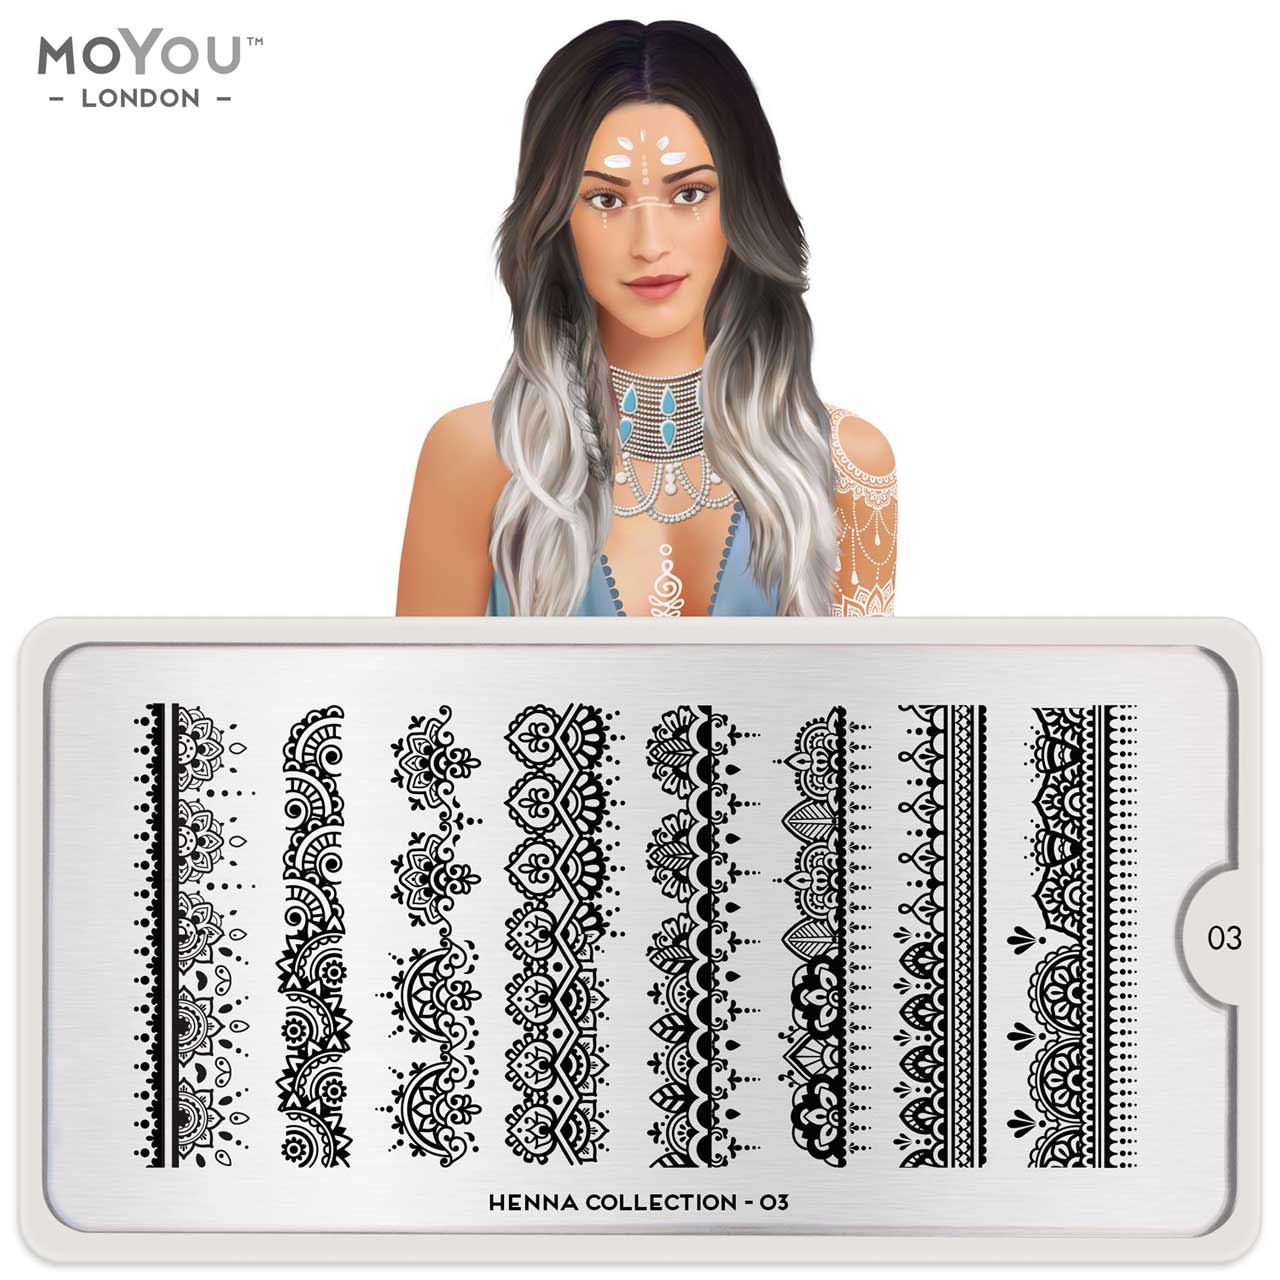 Plaque Stamping Henna 03 - MoYou London